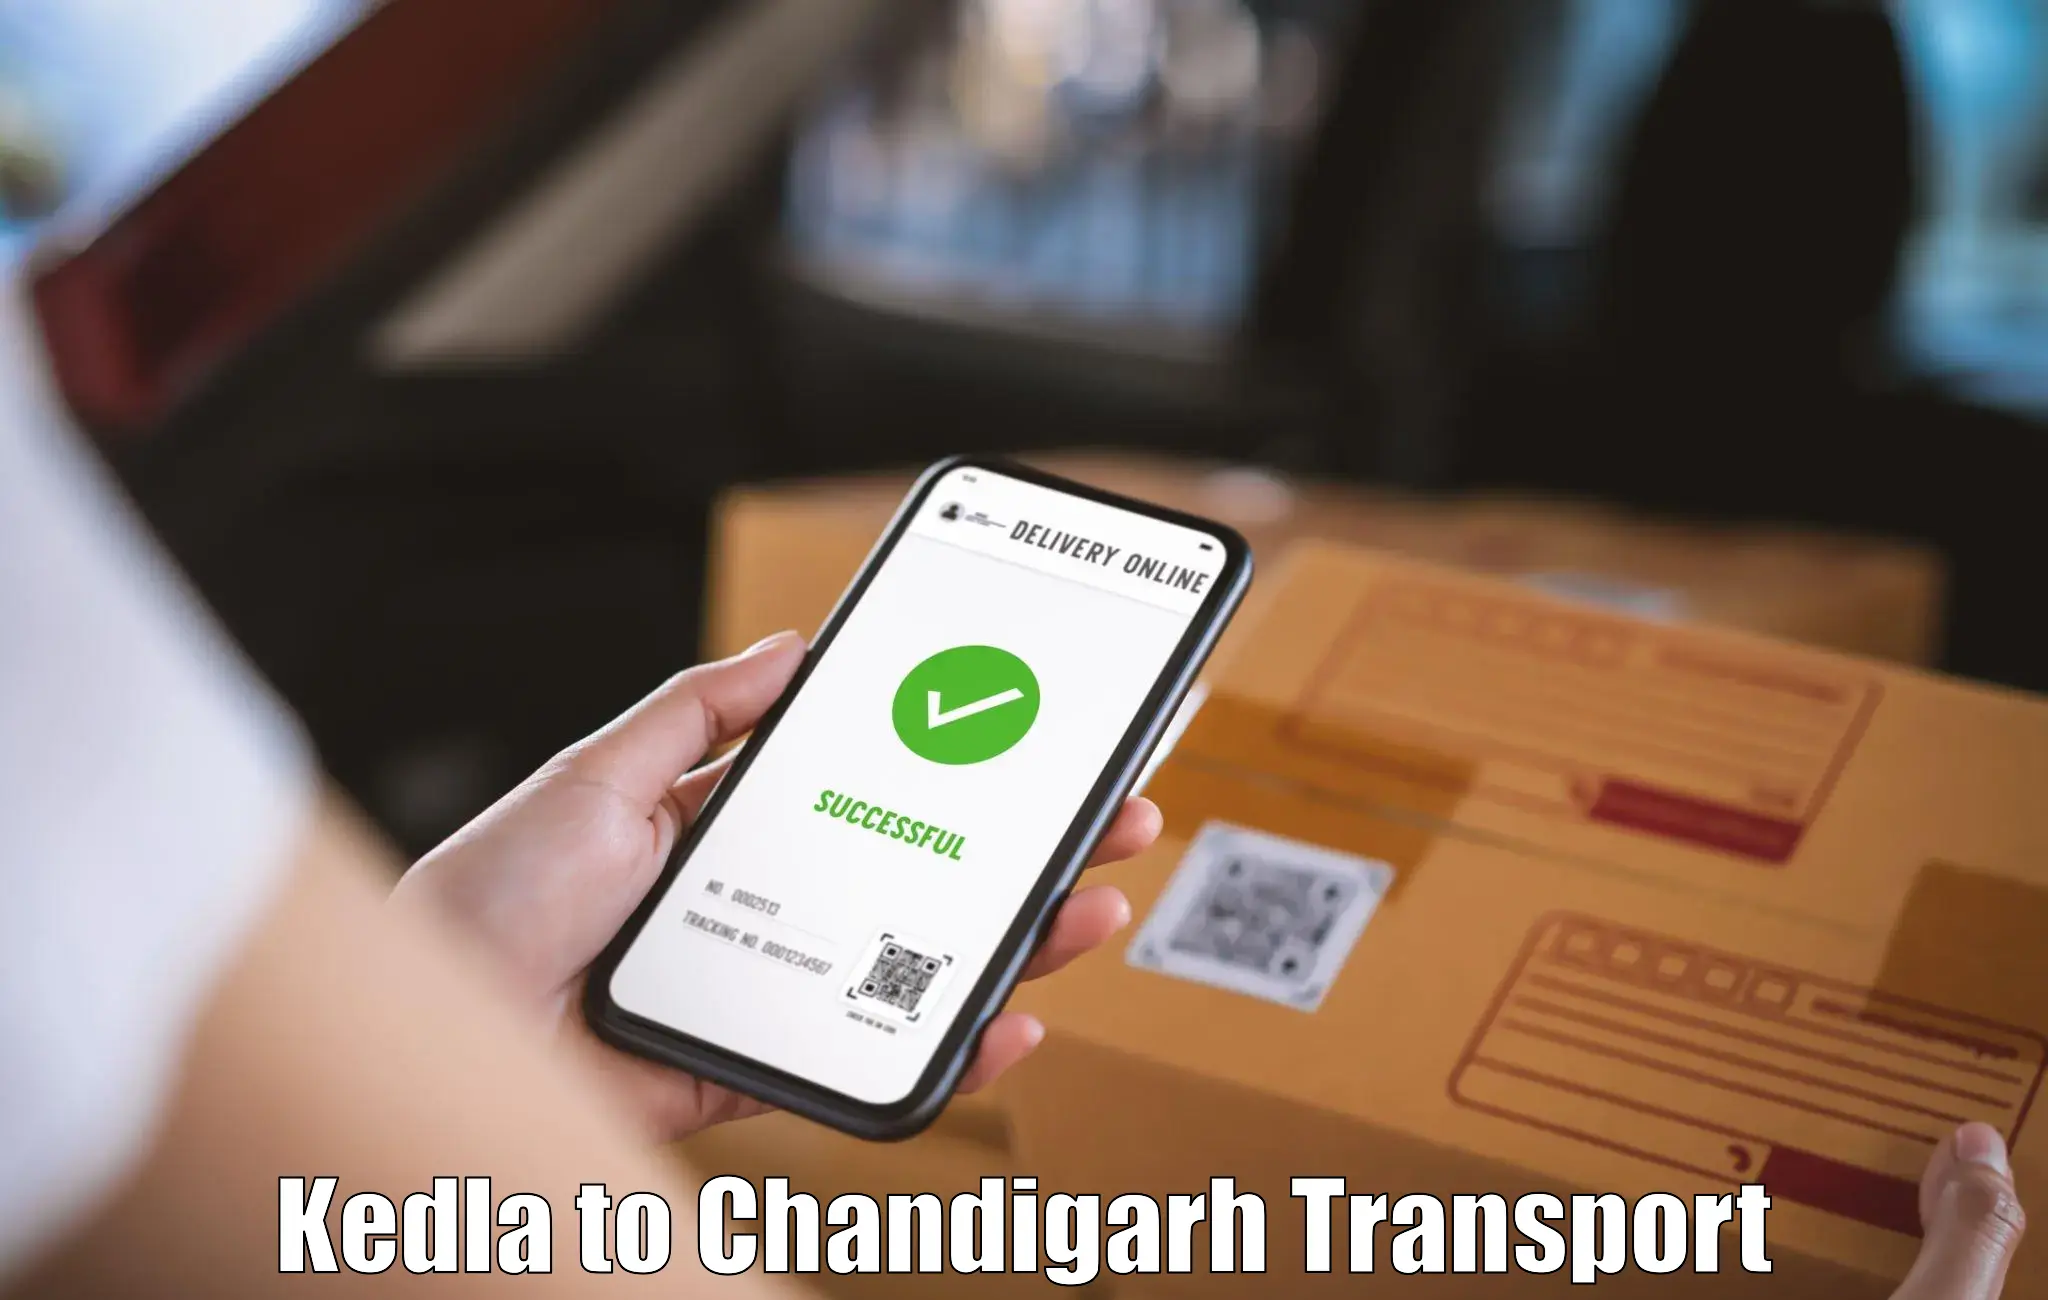 Road transport services Kedla to Chandigarh